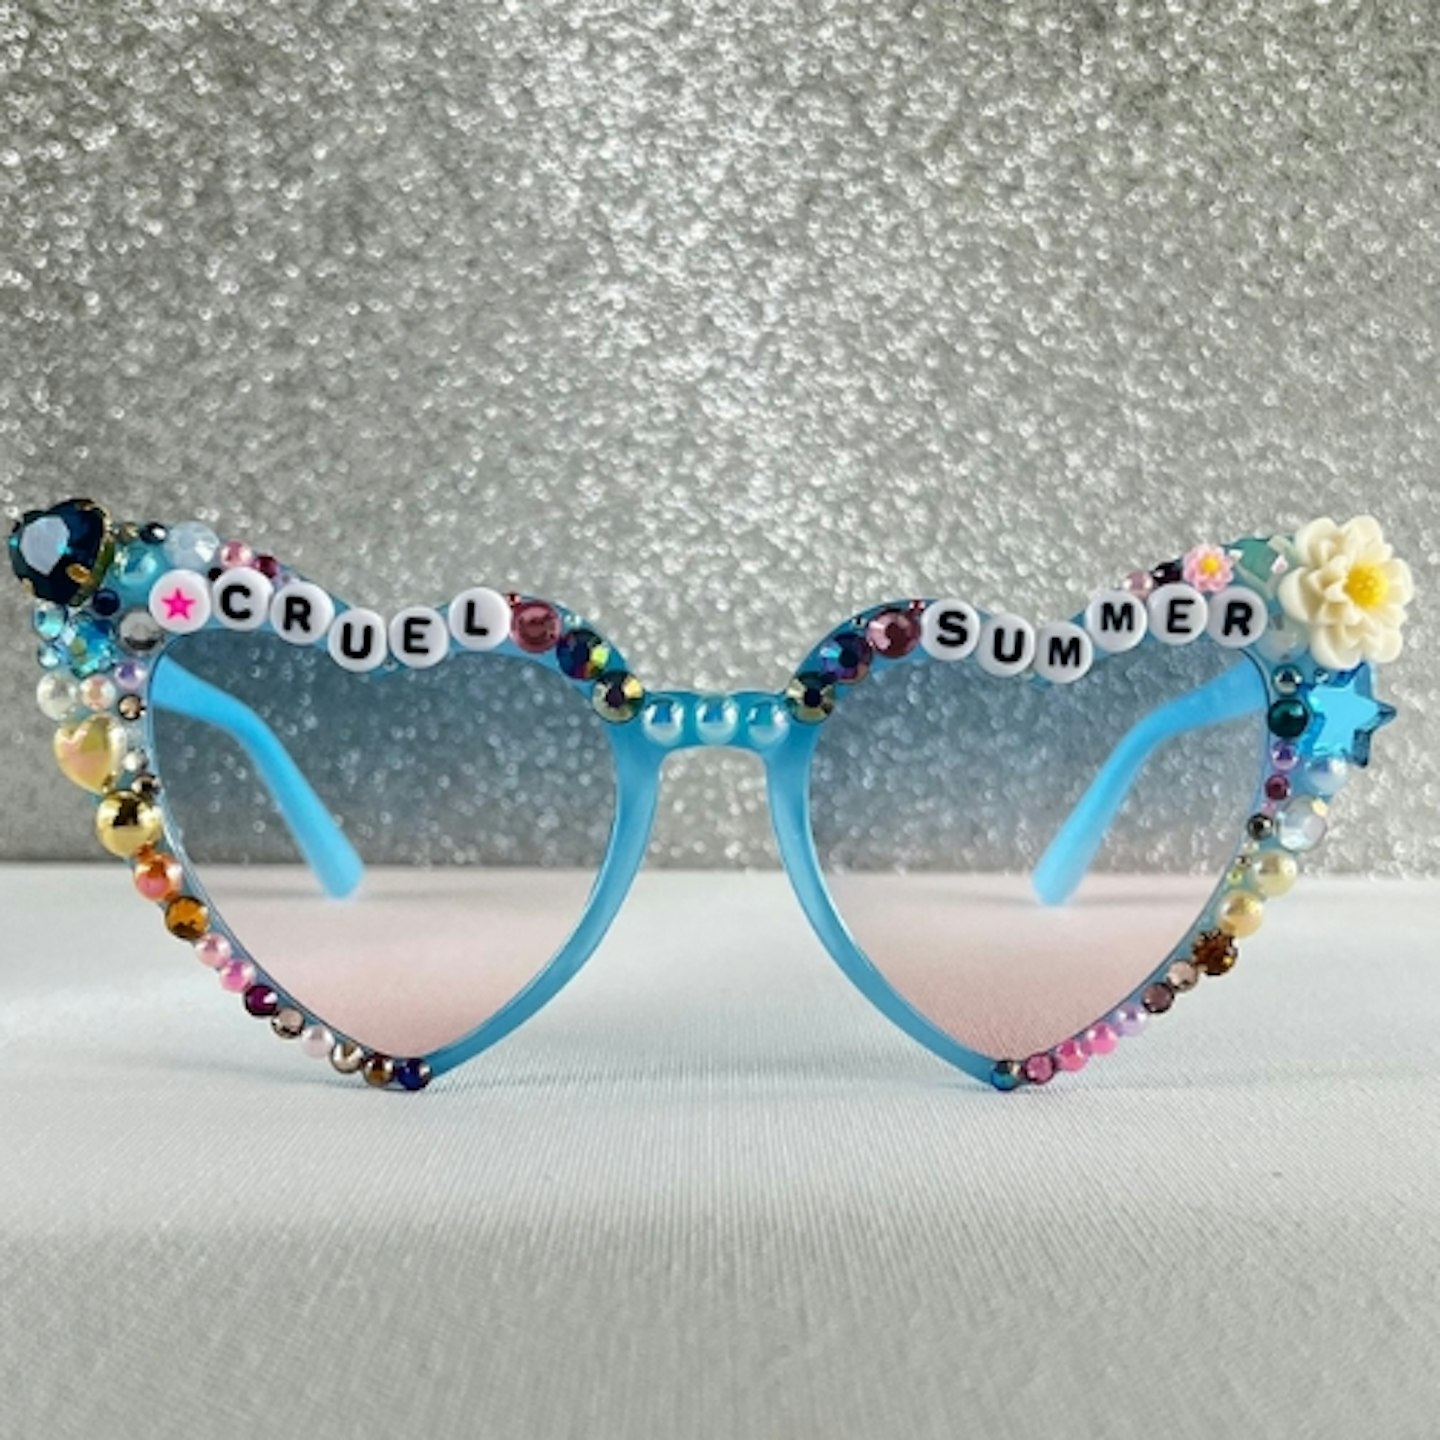 Lover Era Taylor Swift Inspired Bejeweled Sunglasses